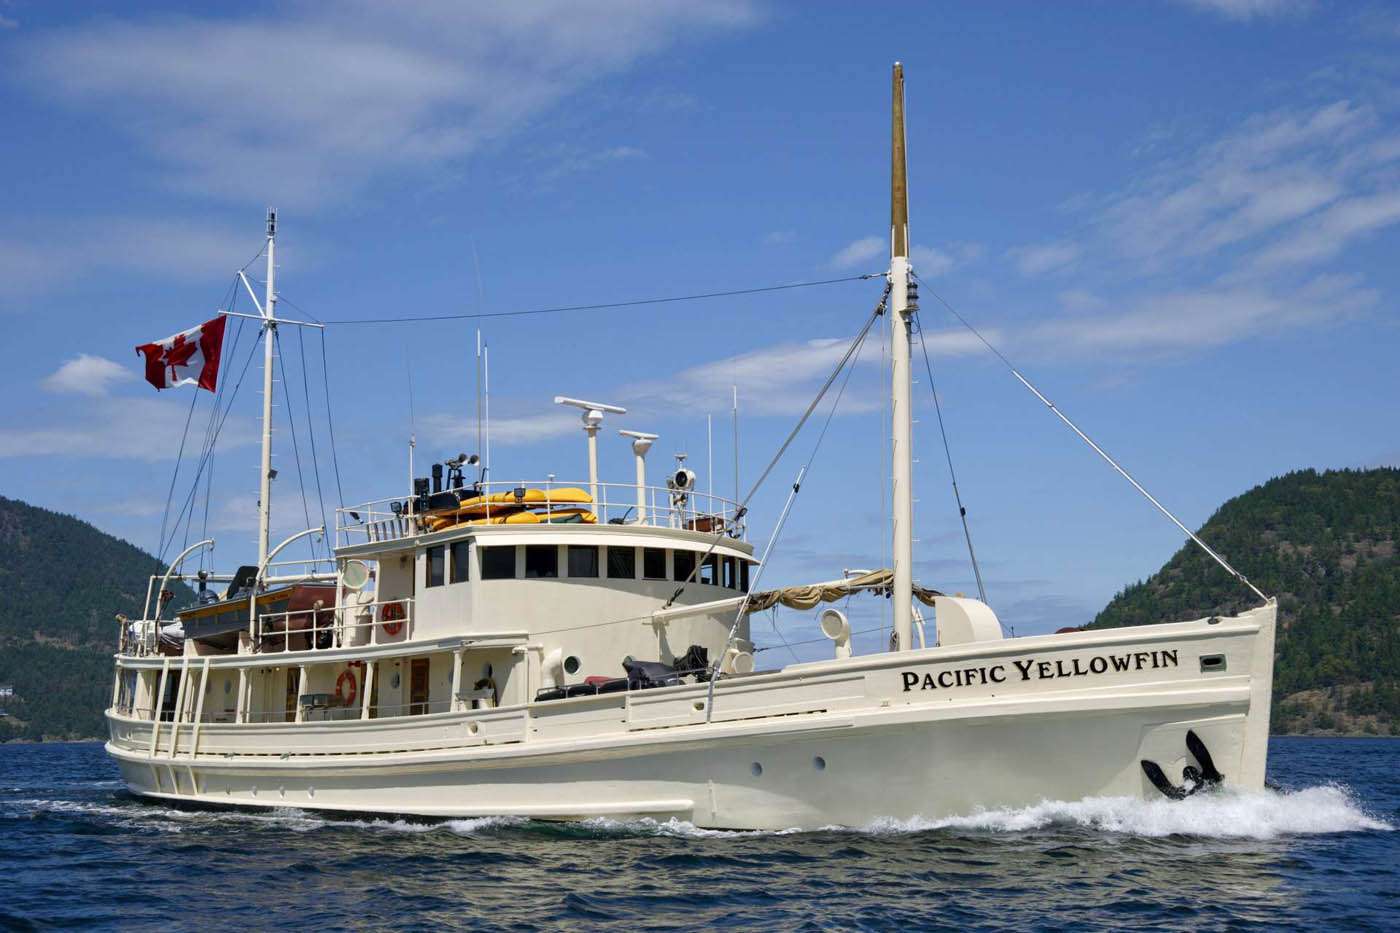 pacific yellowfin - Yacht Charter Canada & Boat hire in Pacific North West & Canada 1